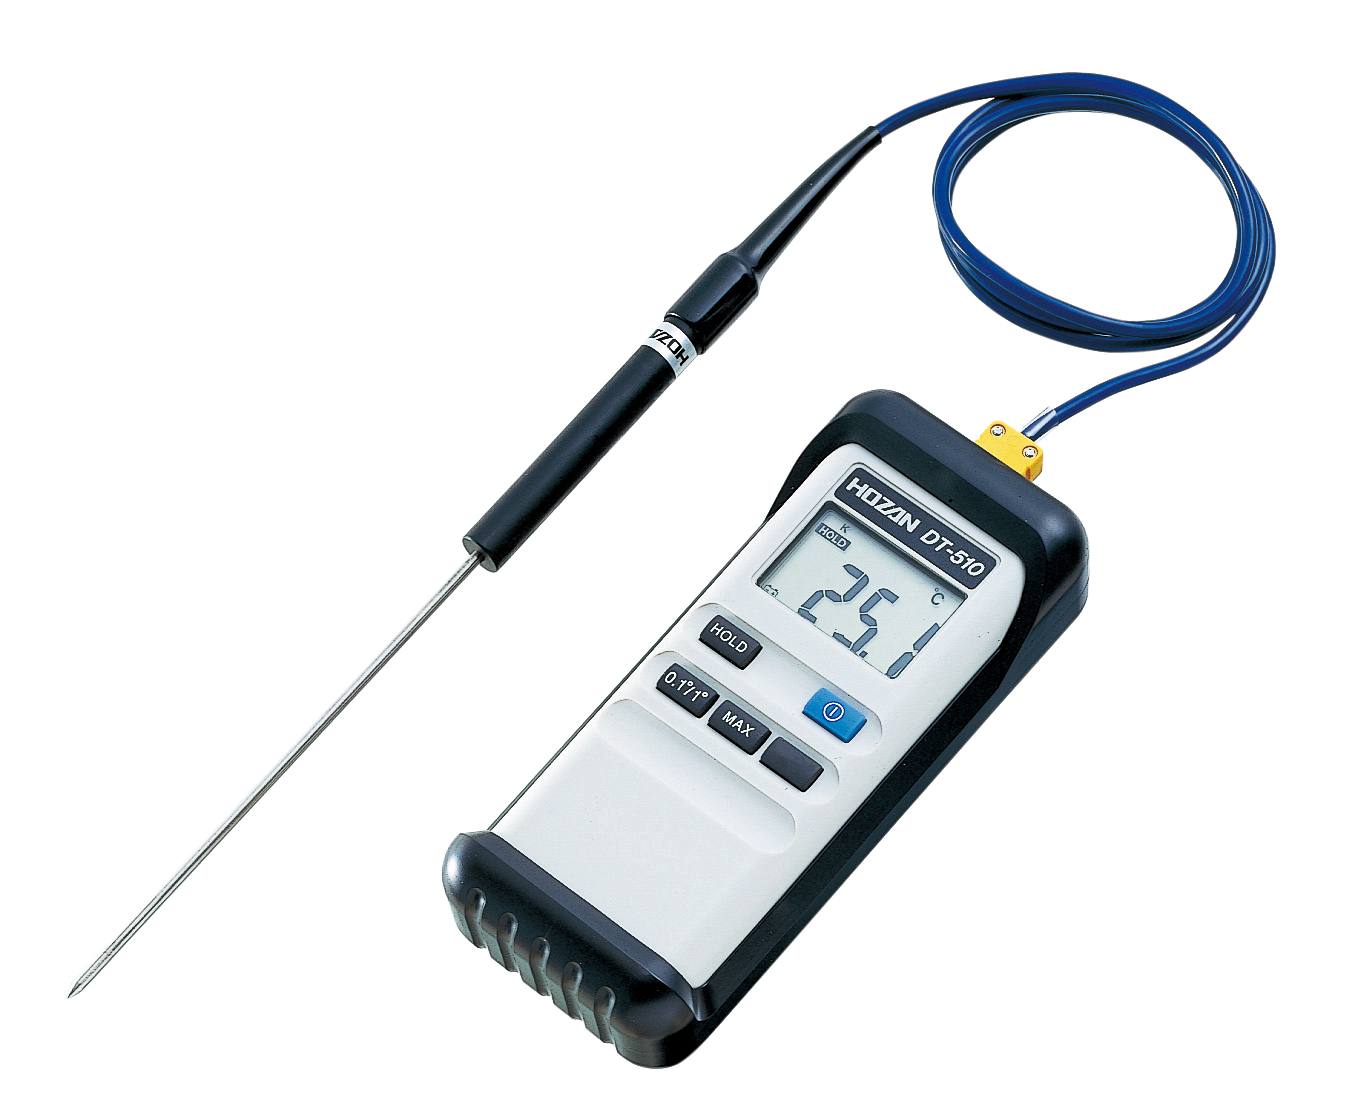 Digital Thermometer (DT-510)